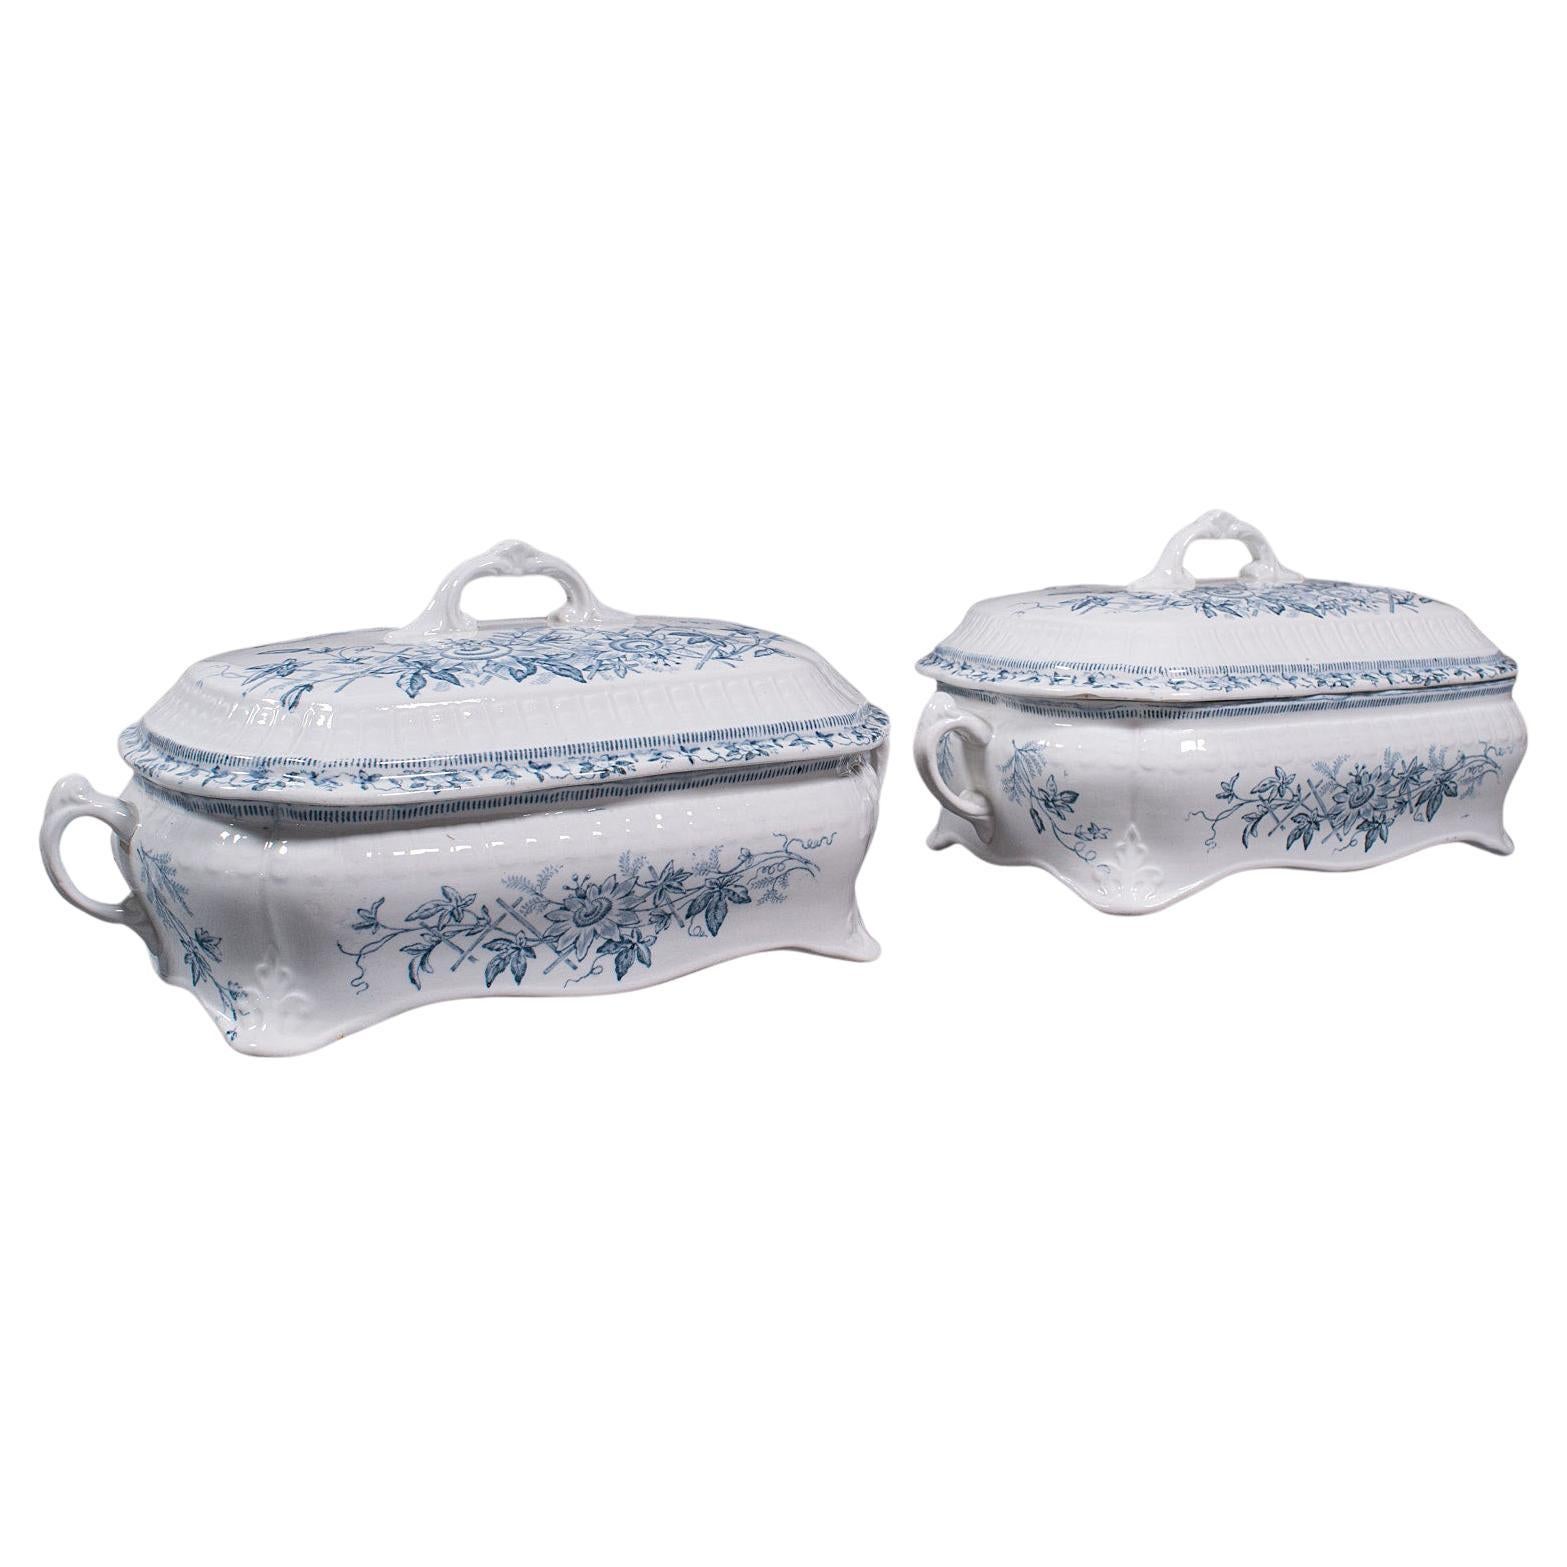 Pair of Antique Serving Tureens, English, Ceramic, Lidded Dish, Victorian, 1900 For Sale